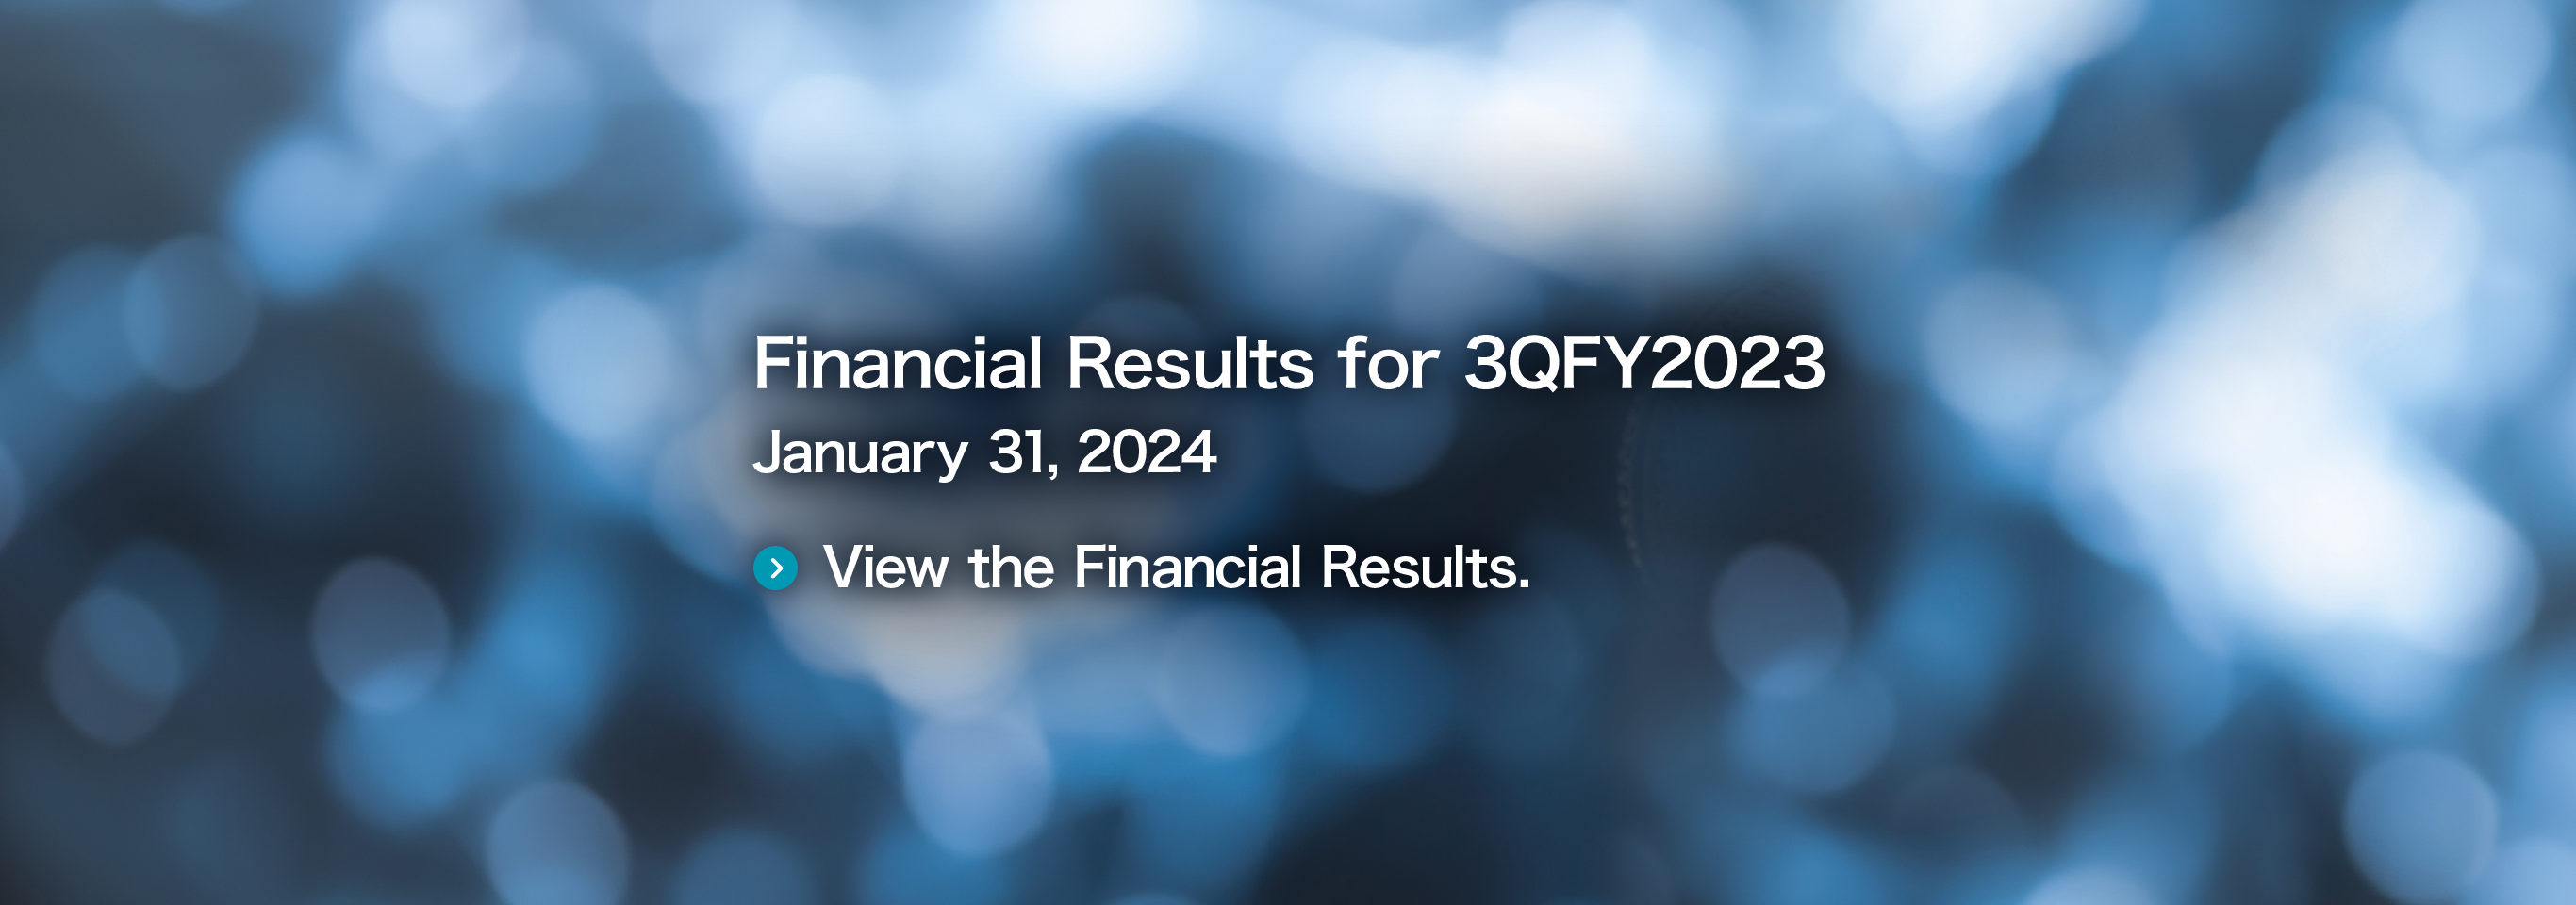 Investor Meeting on Financial Results for 1HFY2021 November 18, 2021 View the Presentation Materials.